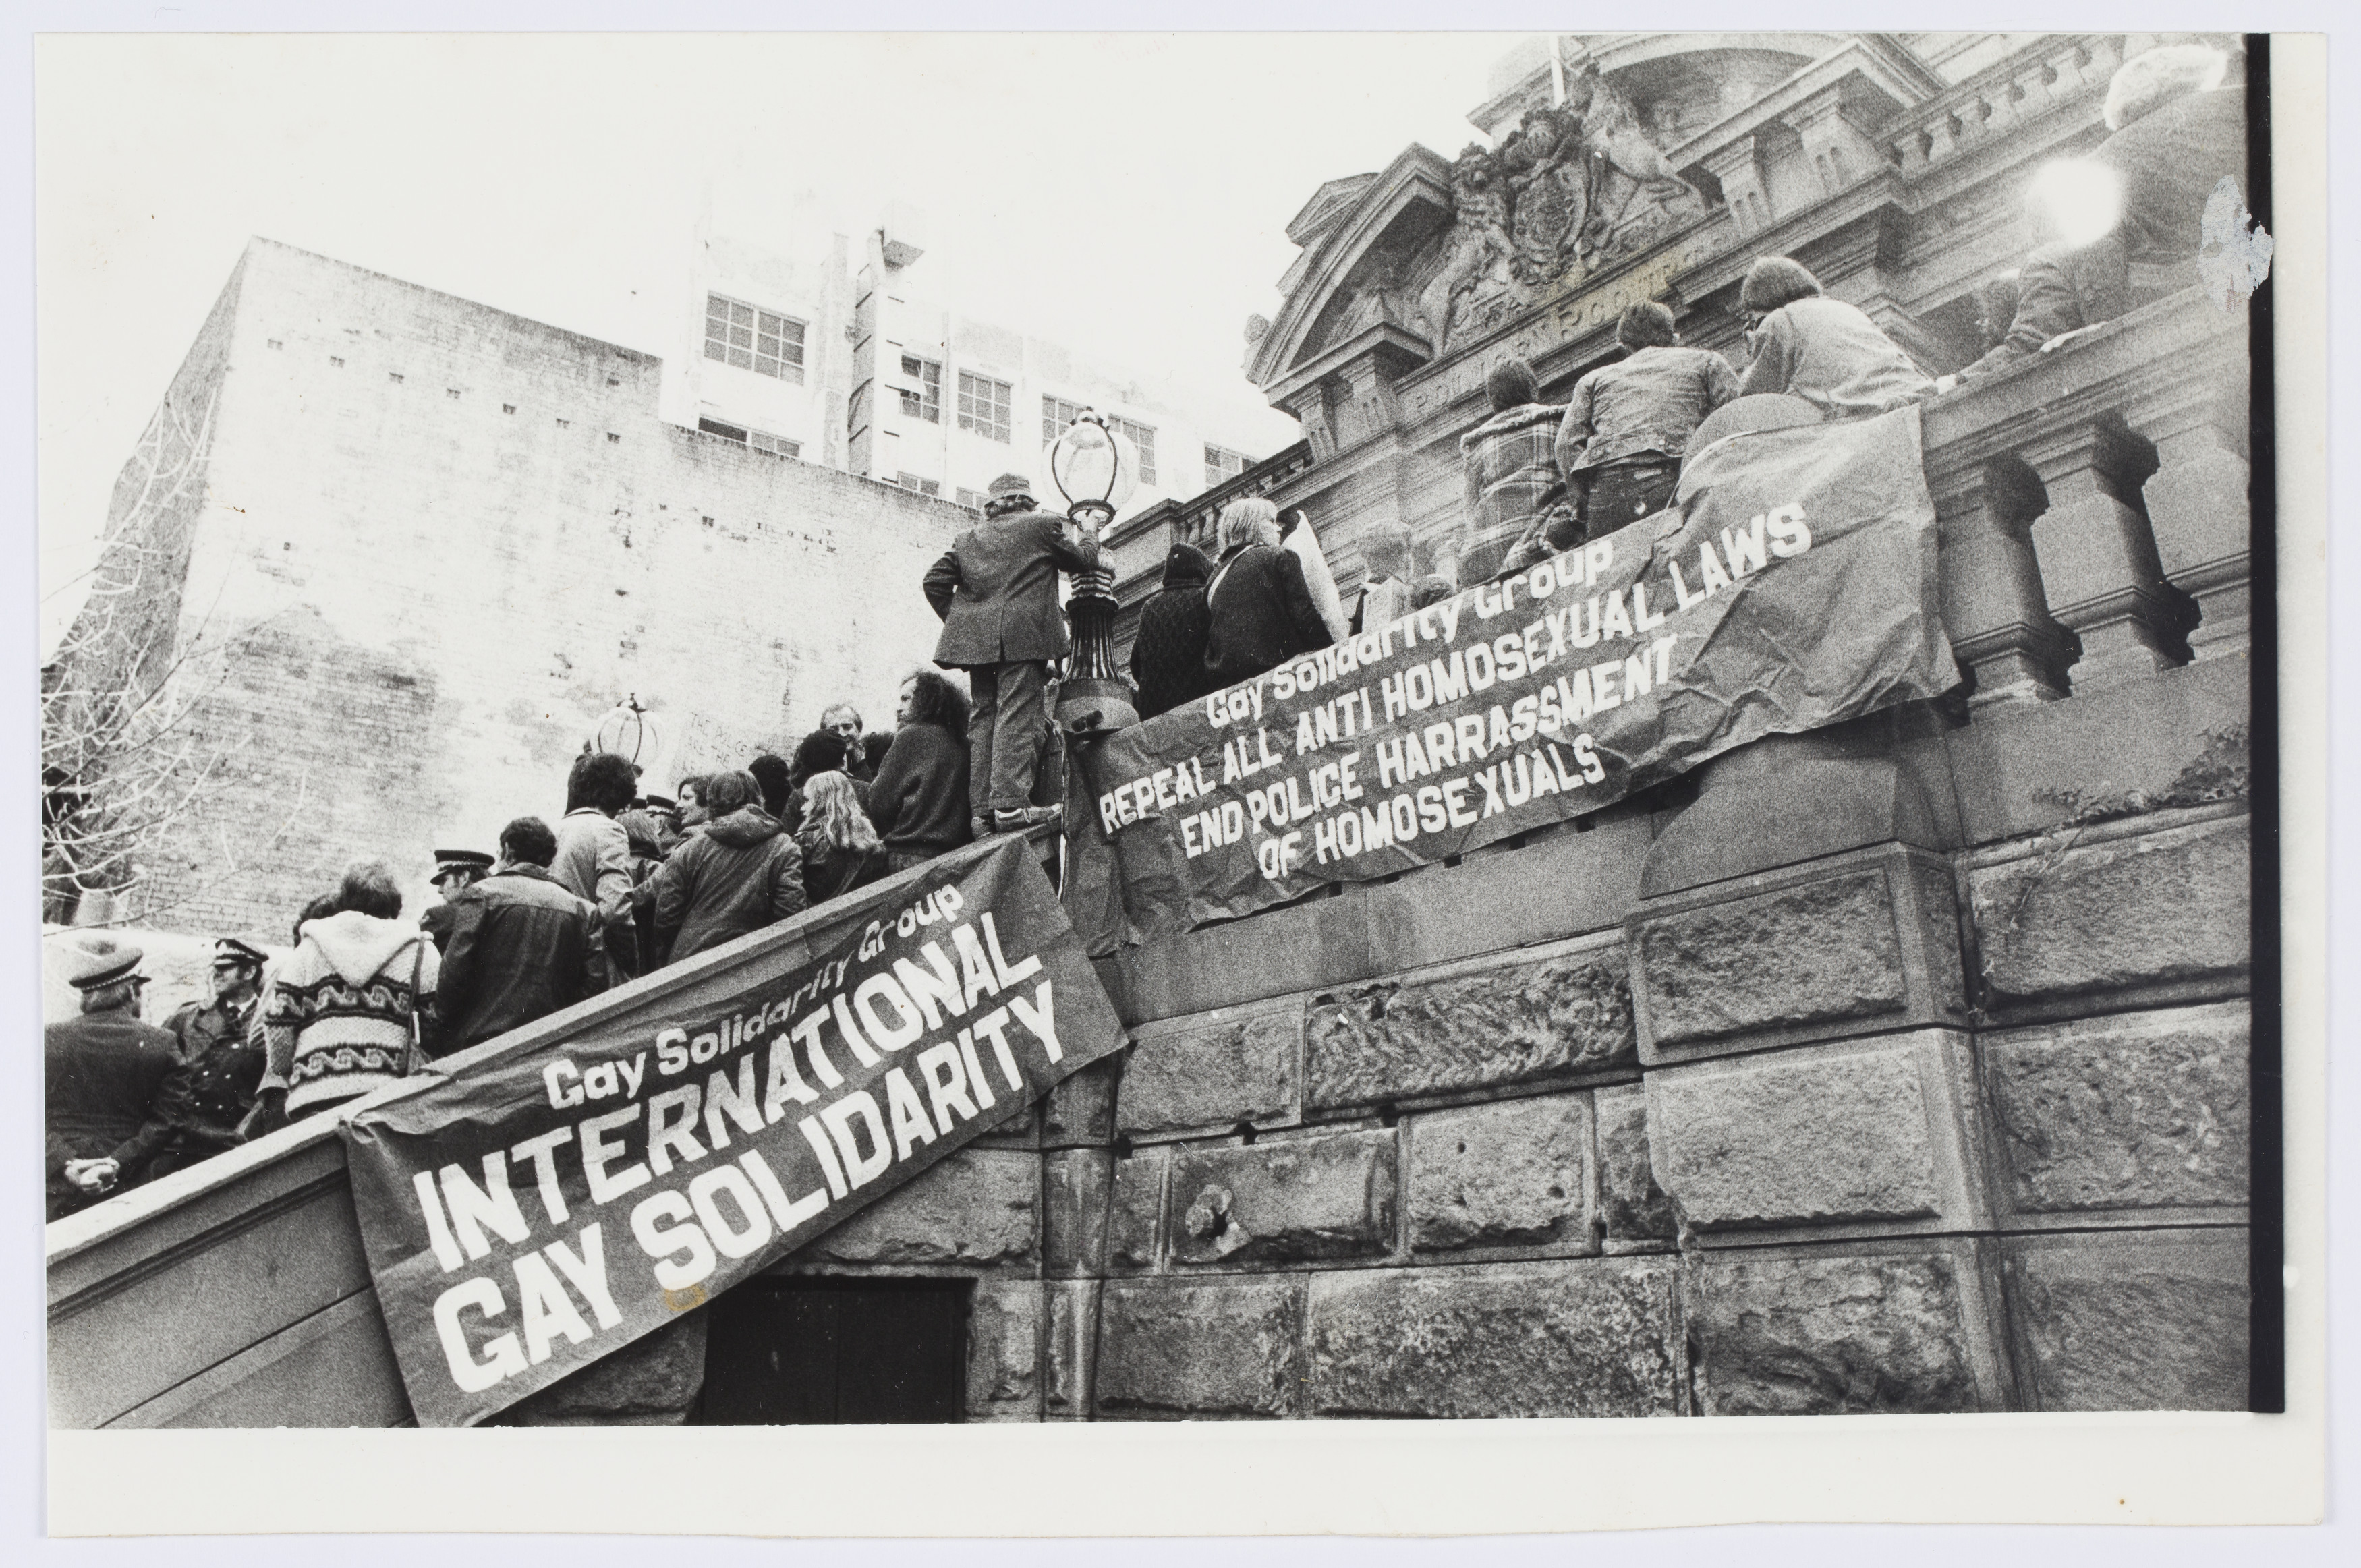 Banners: 'Gay Solidarity Group - International Gay Solidarity' and 'Repeal All Anti- Homosexual Laws End Police Harassment of Homosexuals', Central Police Court, Liverpool St, Sydney. Anne Roberts Collection